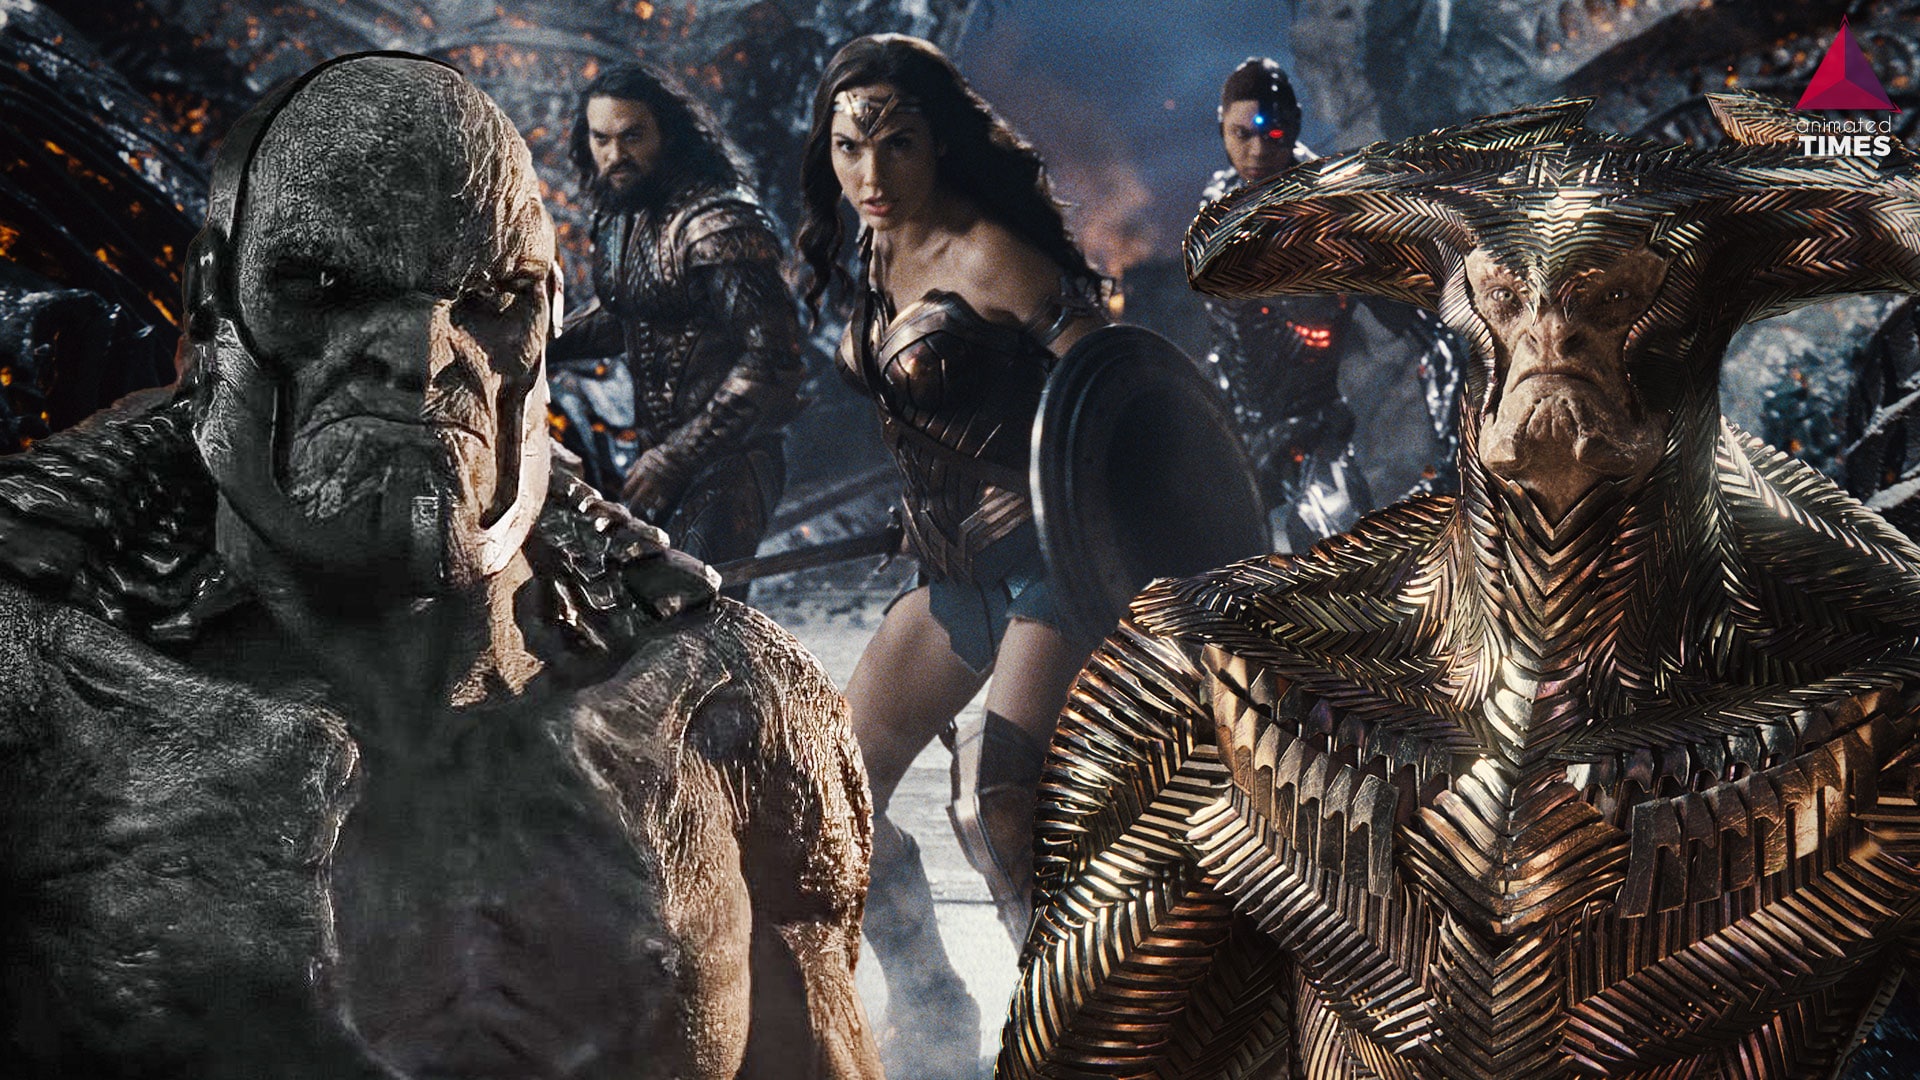 1 Justice League Steppenwolf’s Betrayal Against Darkseid In Snyder Cut